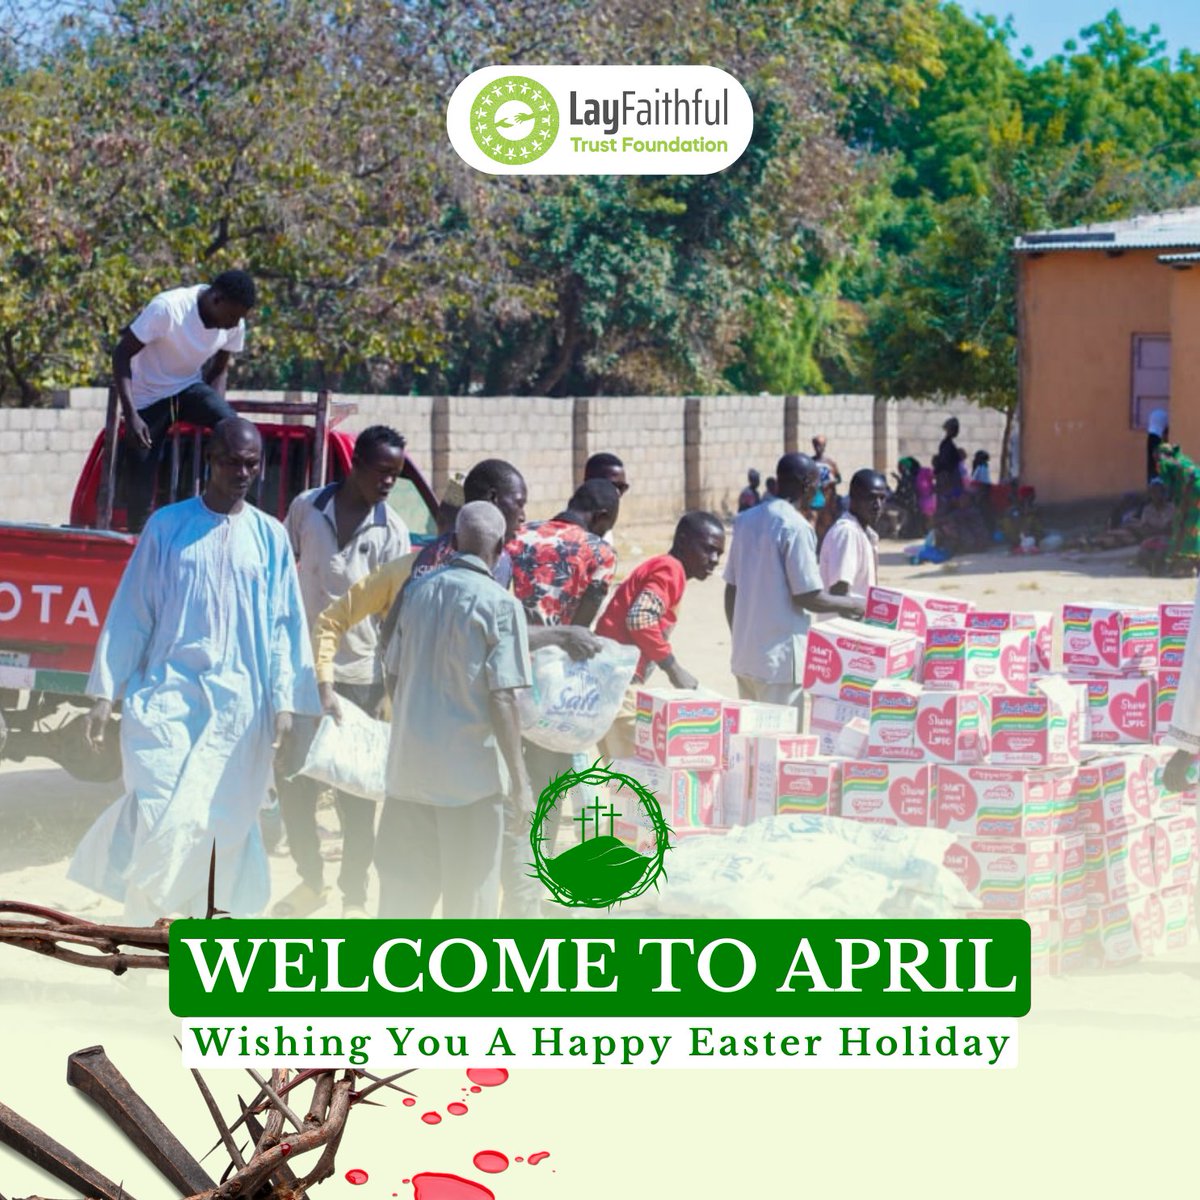 We wish you a special Easter Monday and a blooming start to the new month ahead! Let's celebrate the joys of spring and the spirit of renewal together. Have a blessed month of April